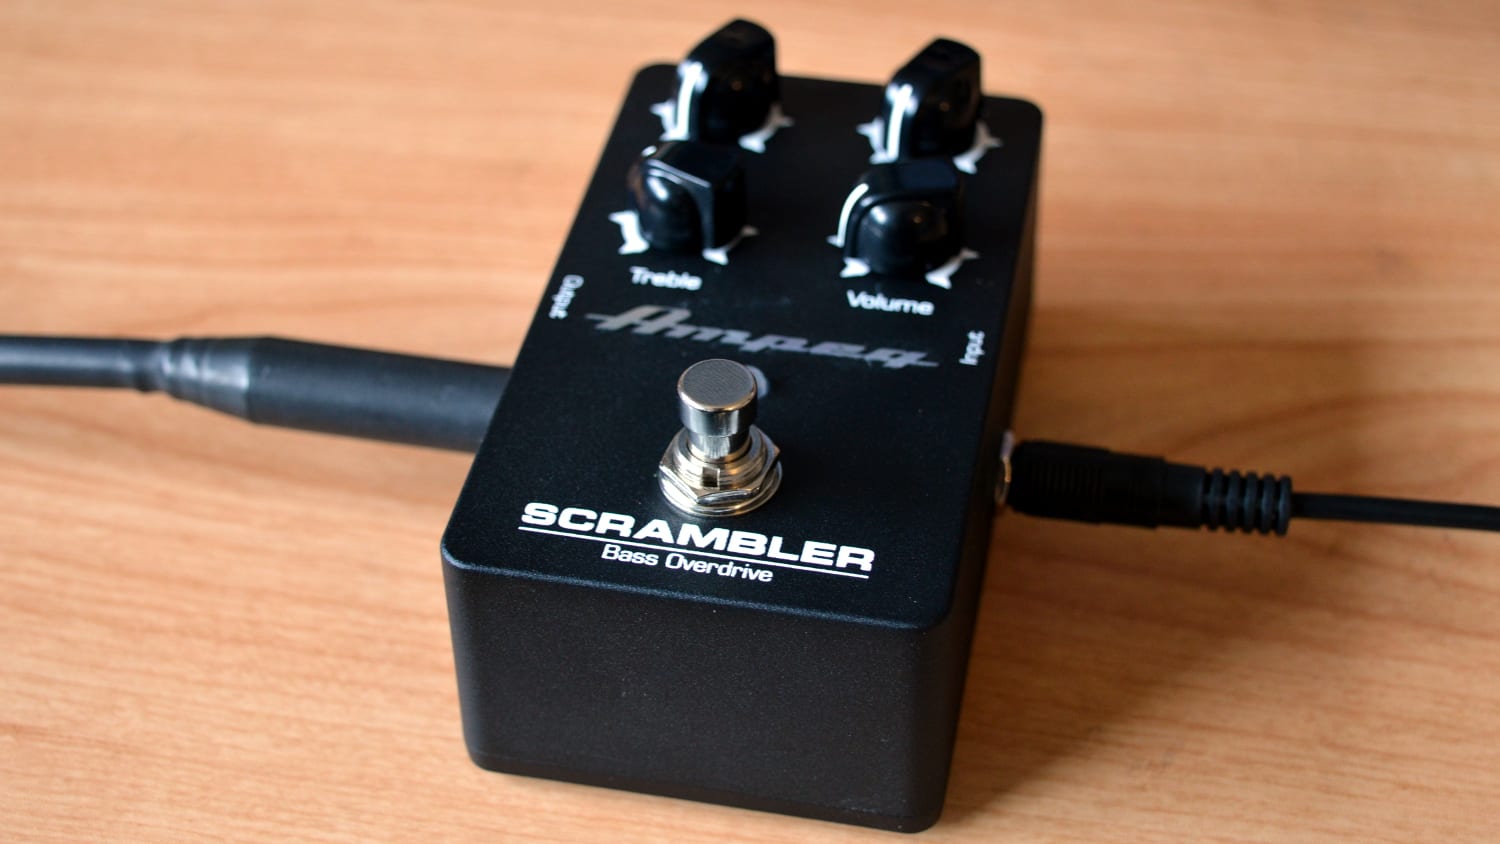 Ampeg Scrambler Bass Overdrive Pedal Review - All Things Gear